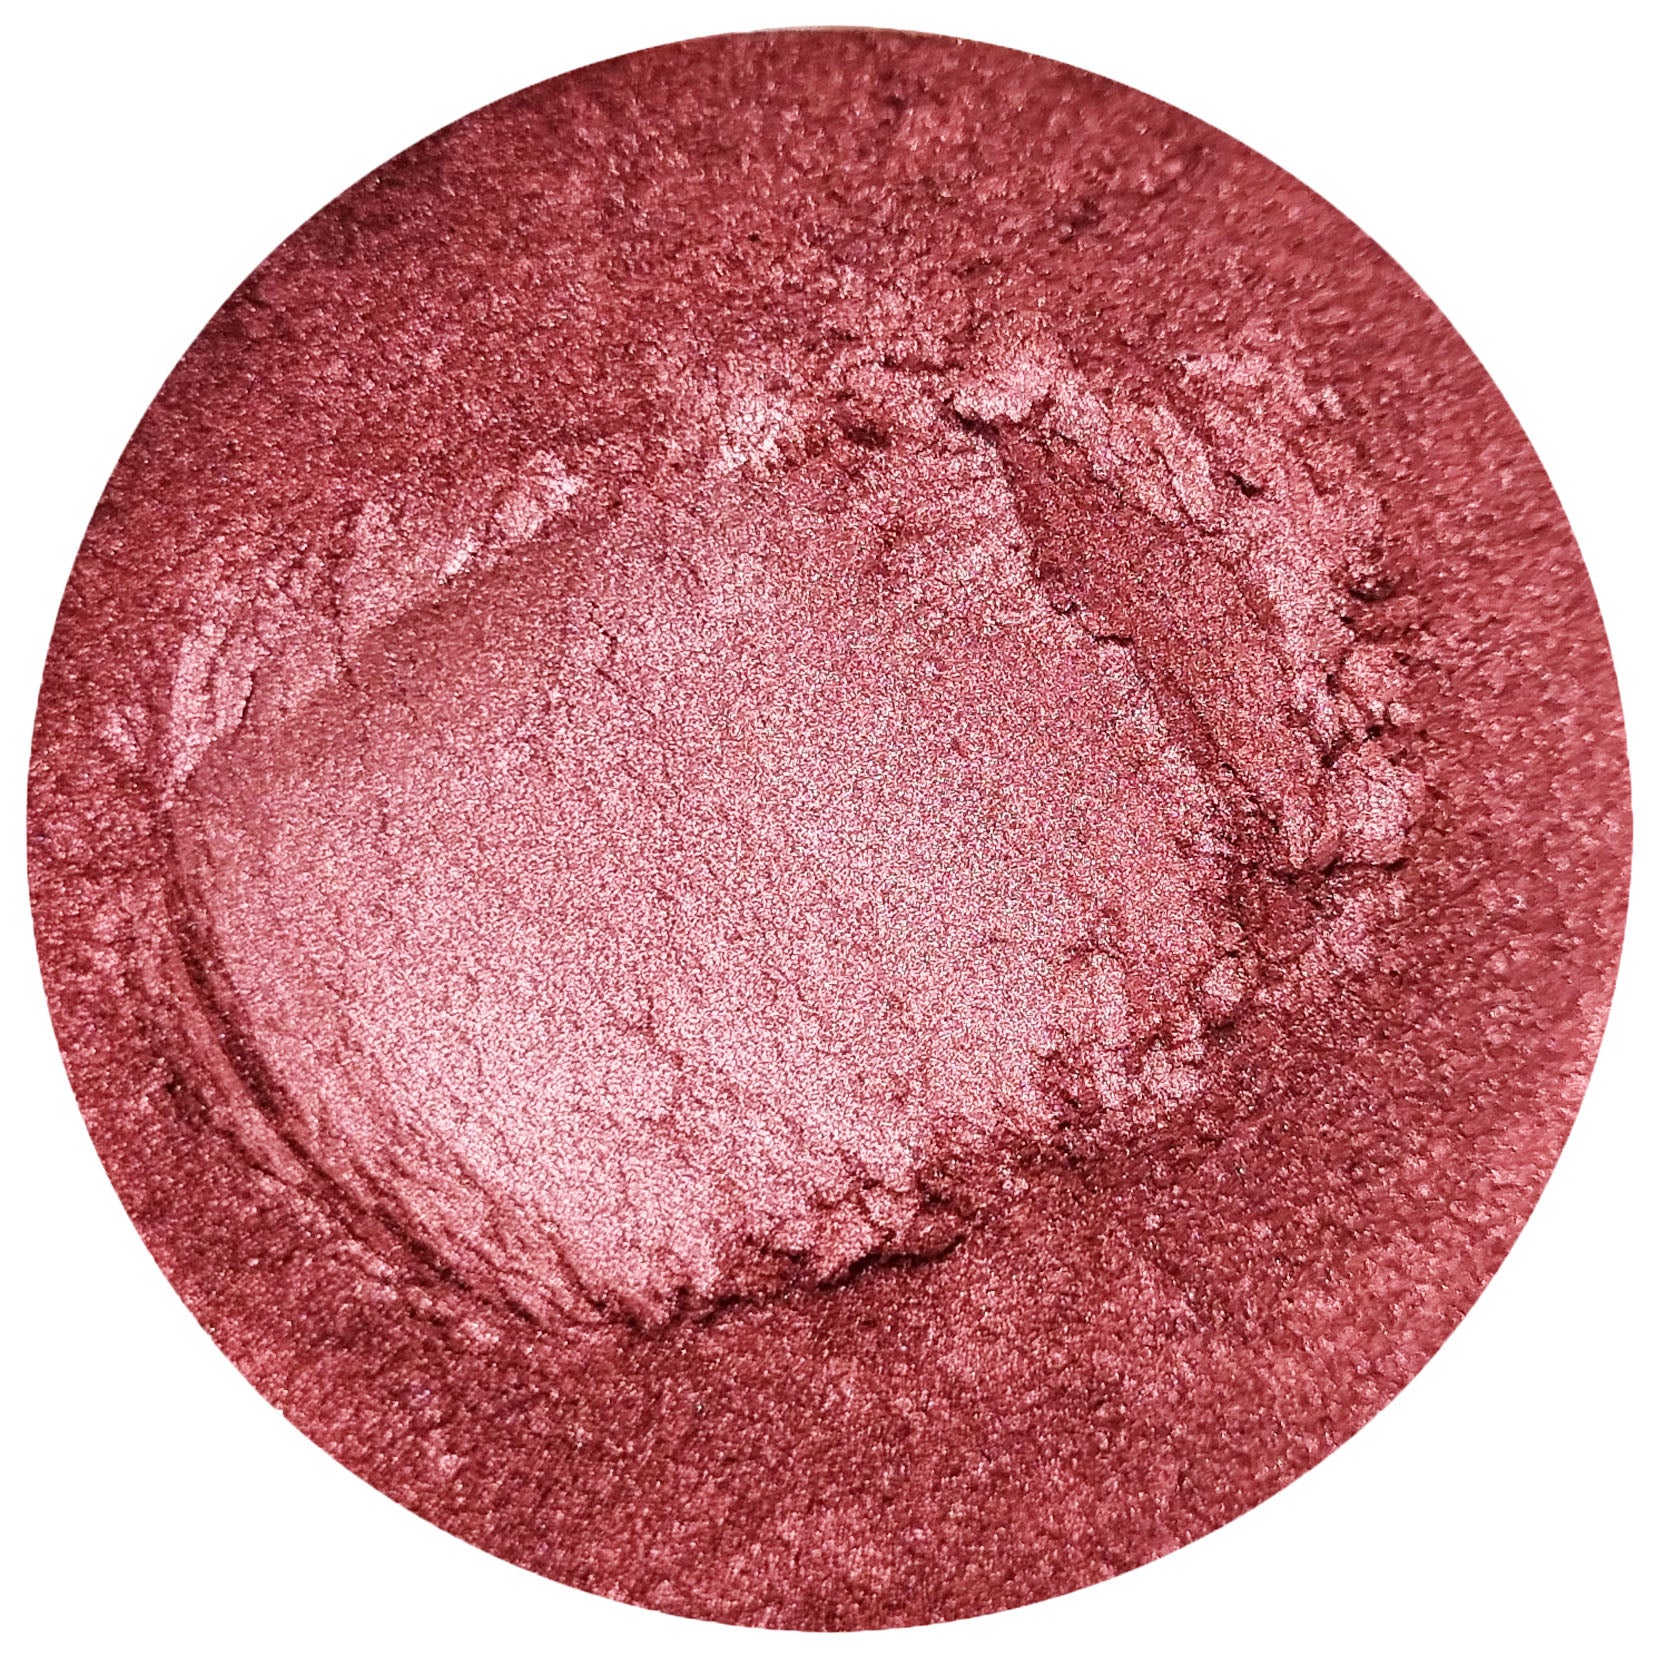 Sangria | Pearlescent Cosmetic Mica | Truly Personal Ltd | Wax Melt Glitter